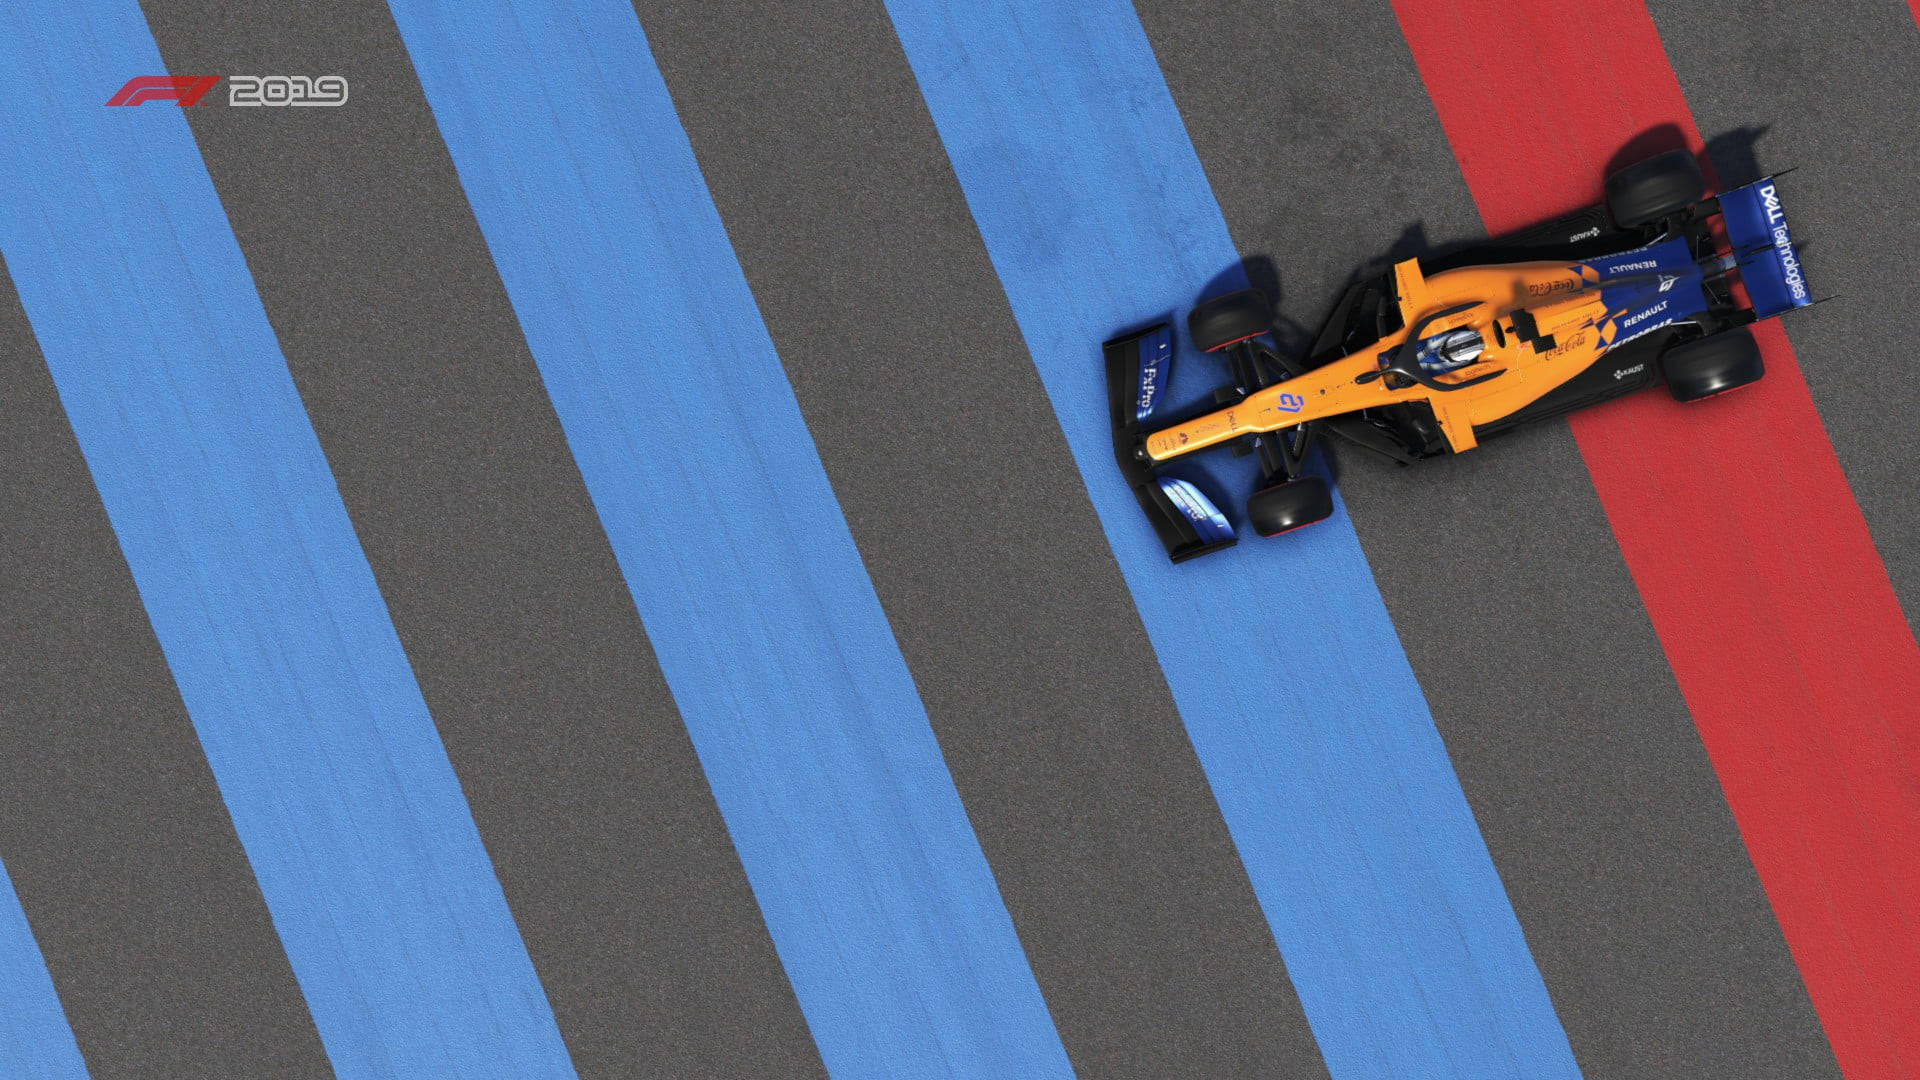 A Dynamic Race With Mclaren F1 On Red And Blue Track Lines Background